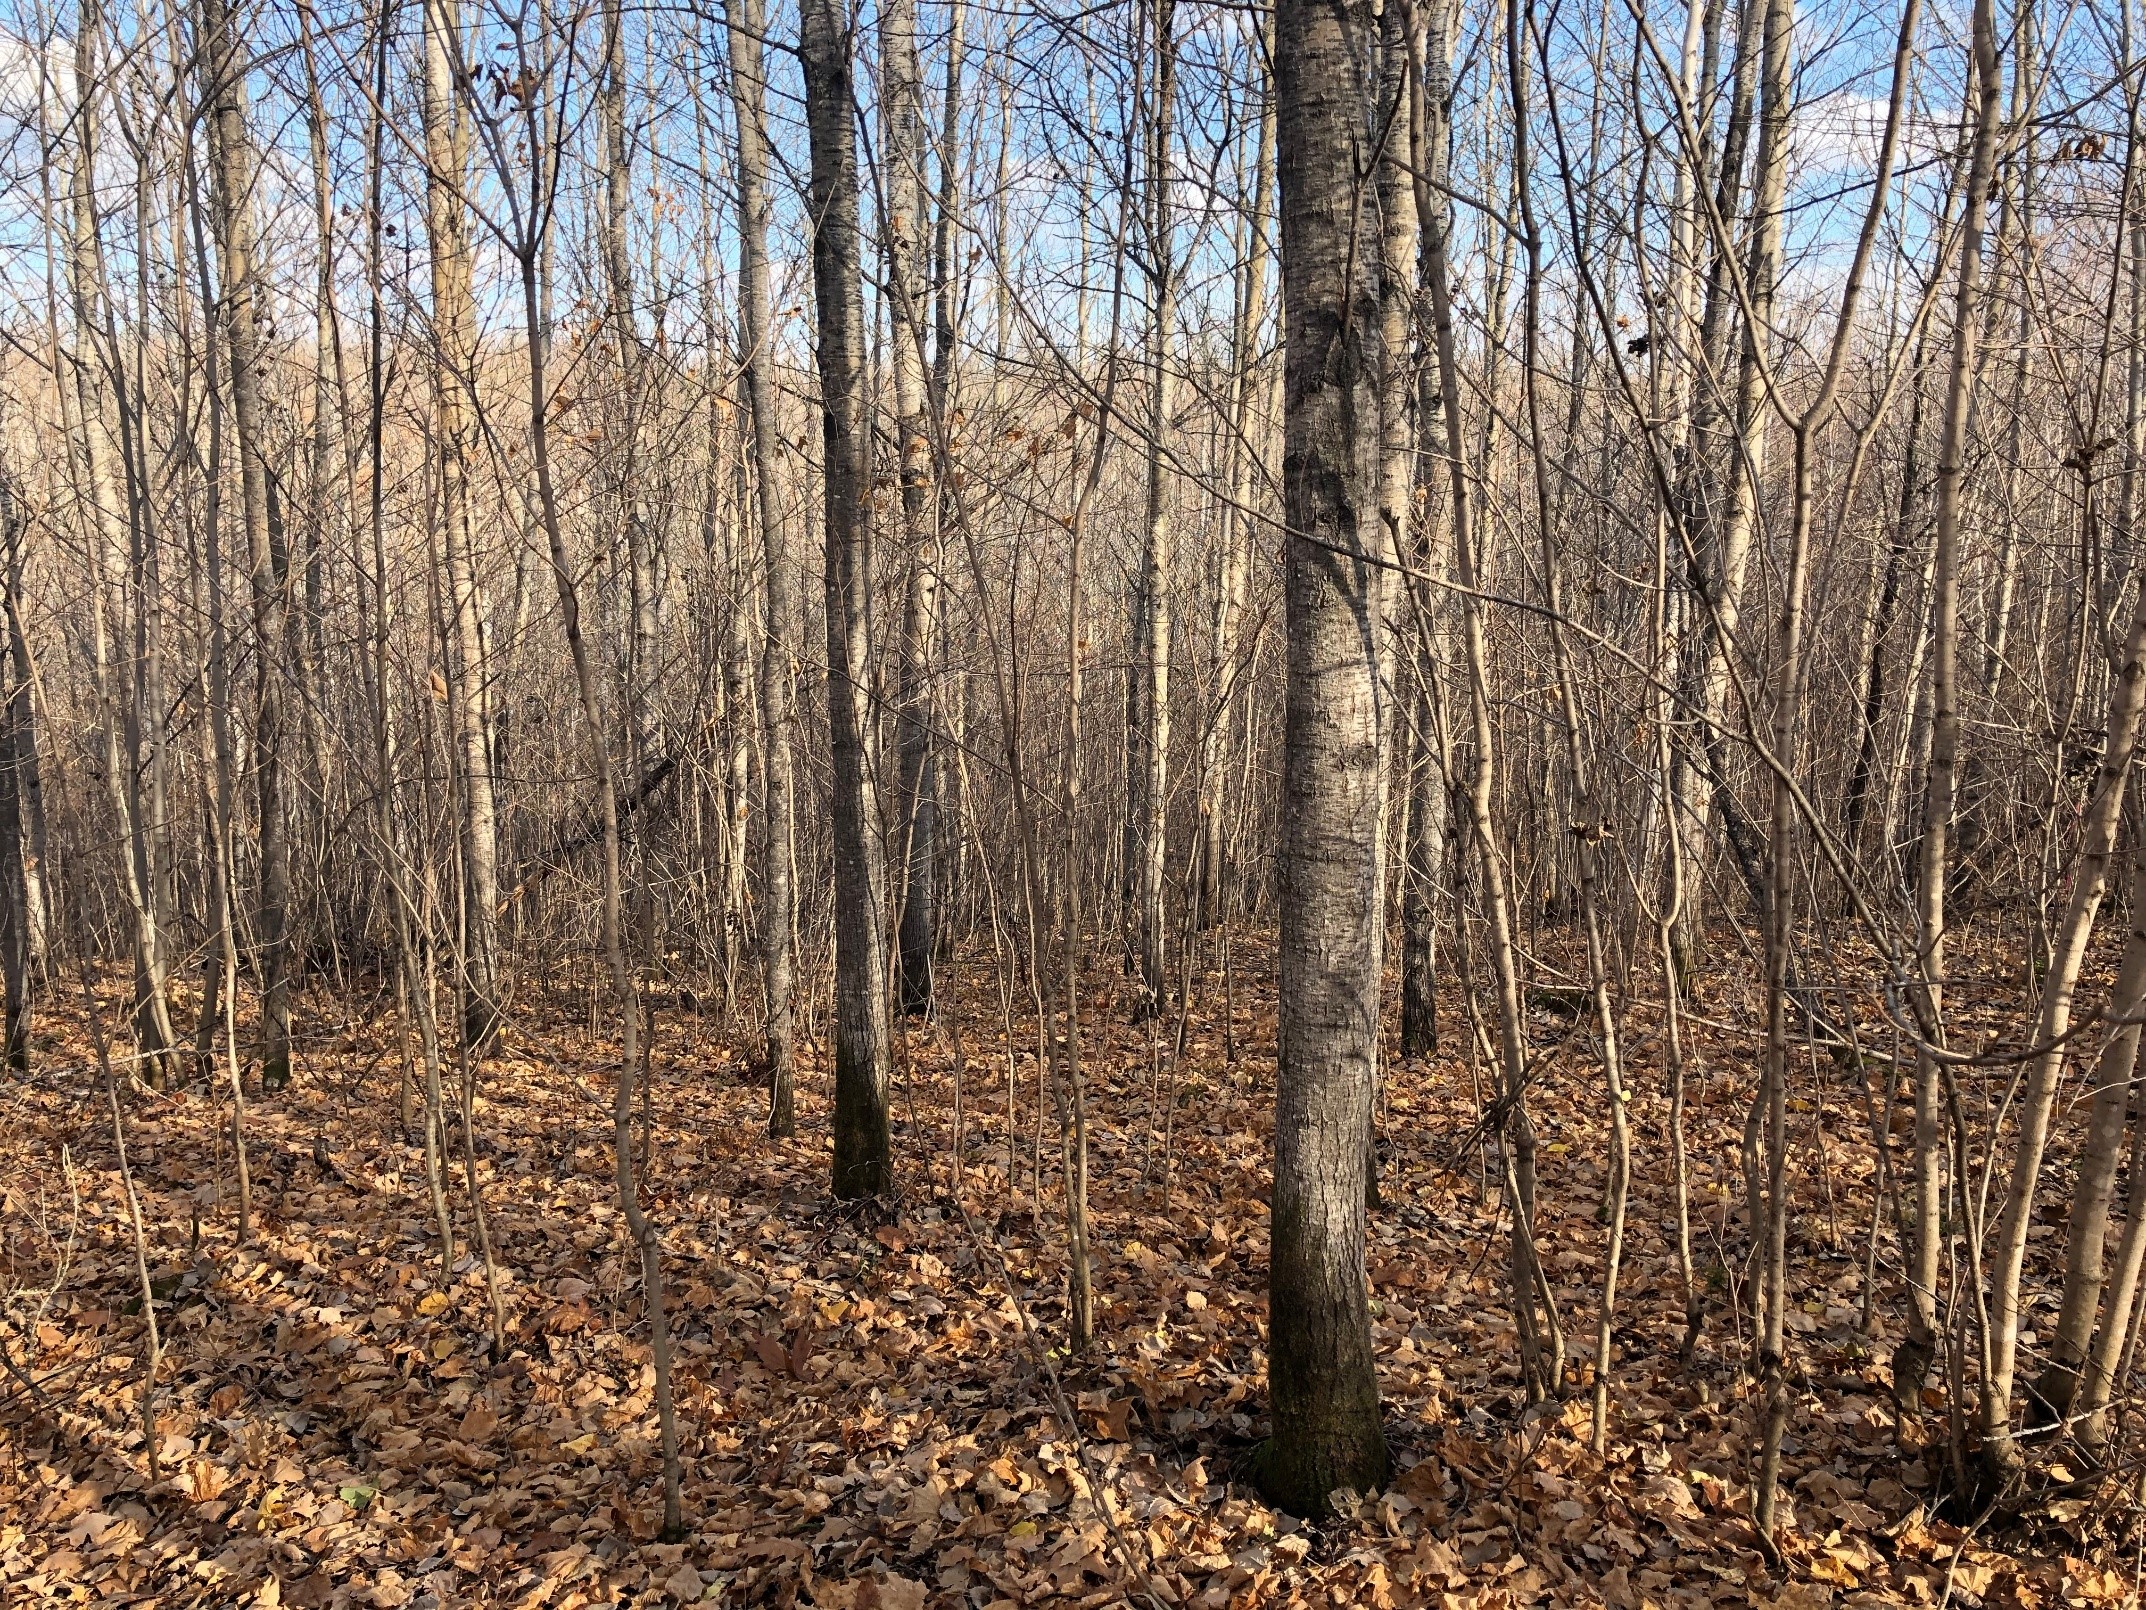 Thinned unit in 2019 when the stand was approximately 22 years old. Note the high density of stems and the larger "crop trees" of aspen present